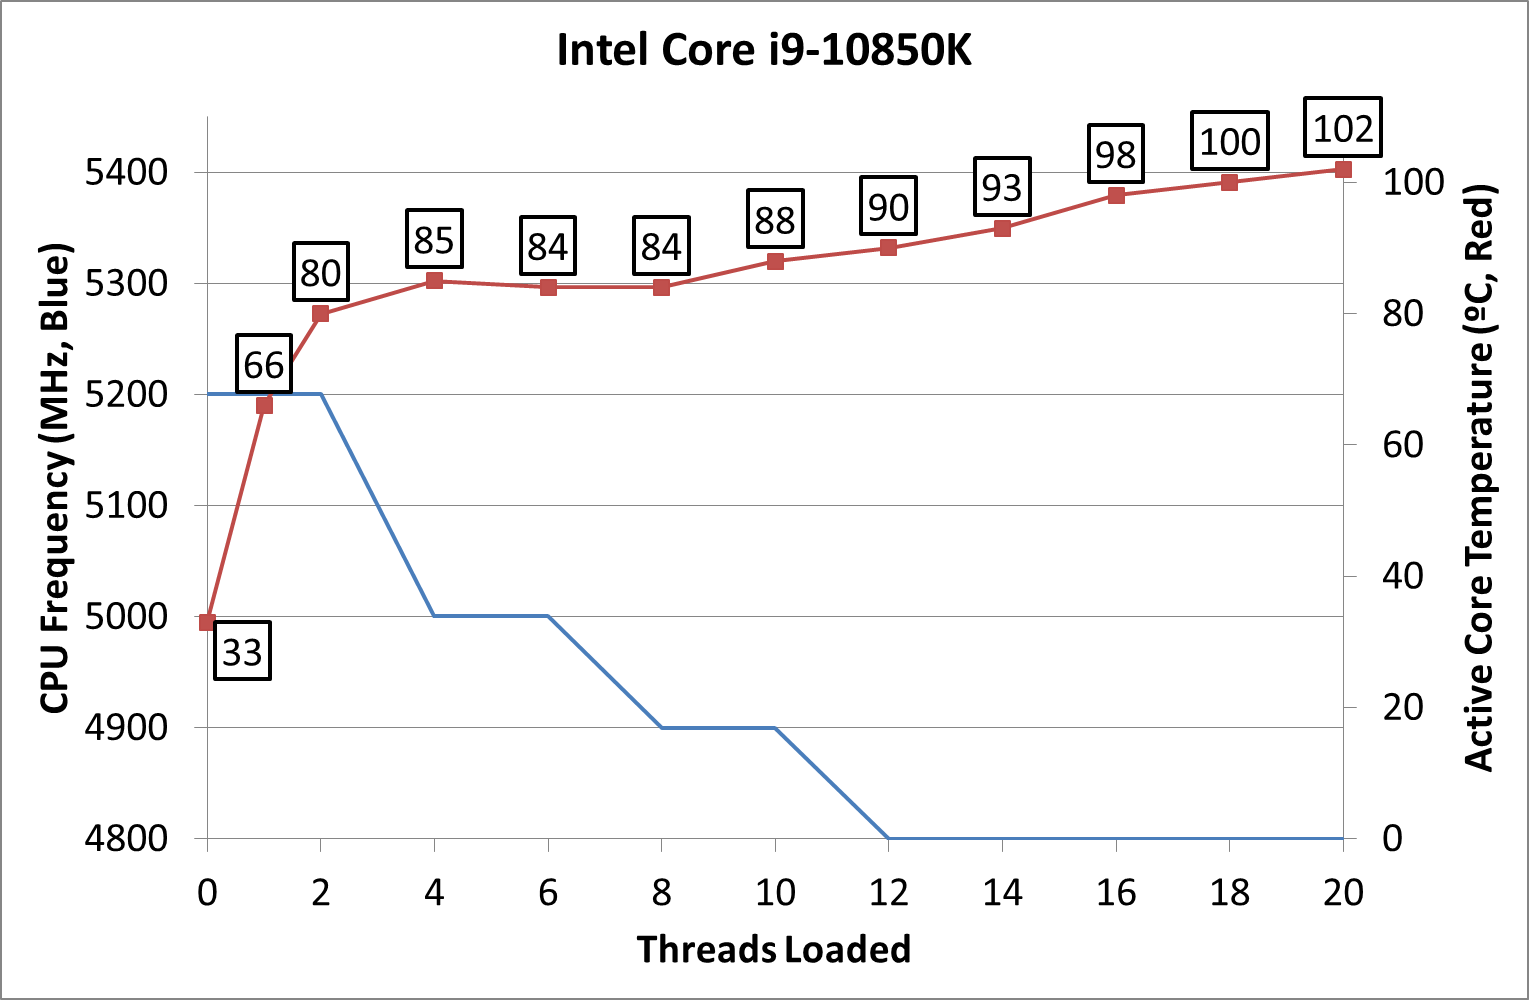 Intel Core i9-10850K Review: The Real Intel Flagship